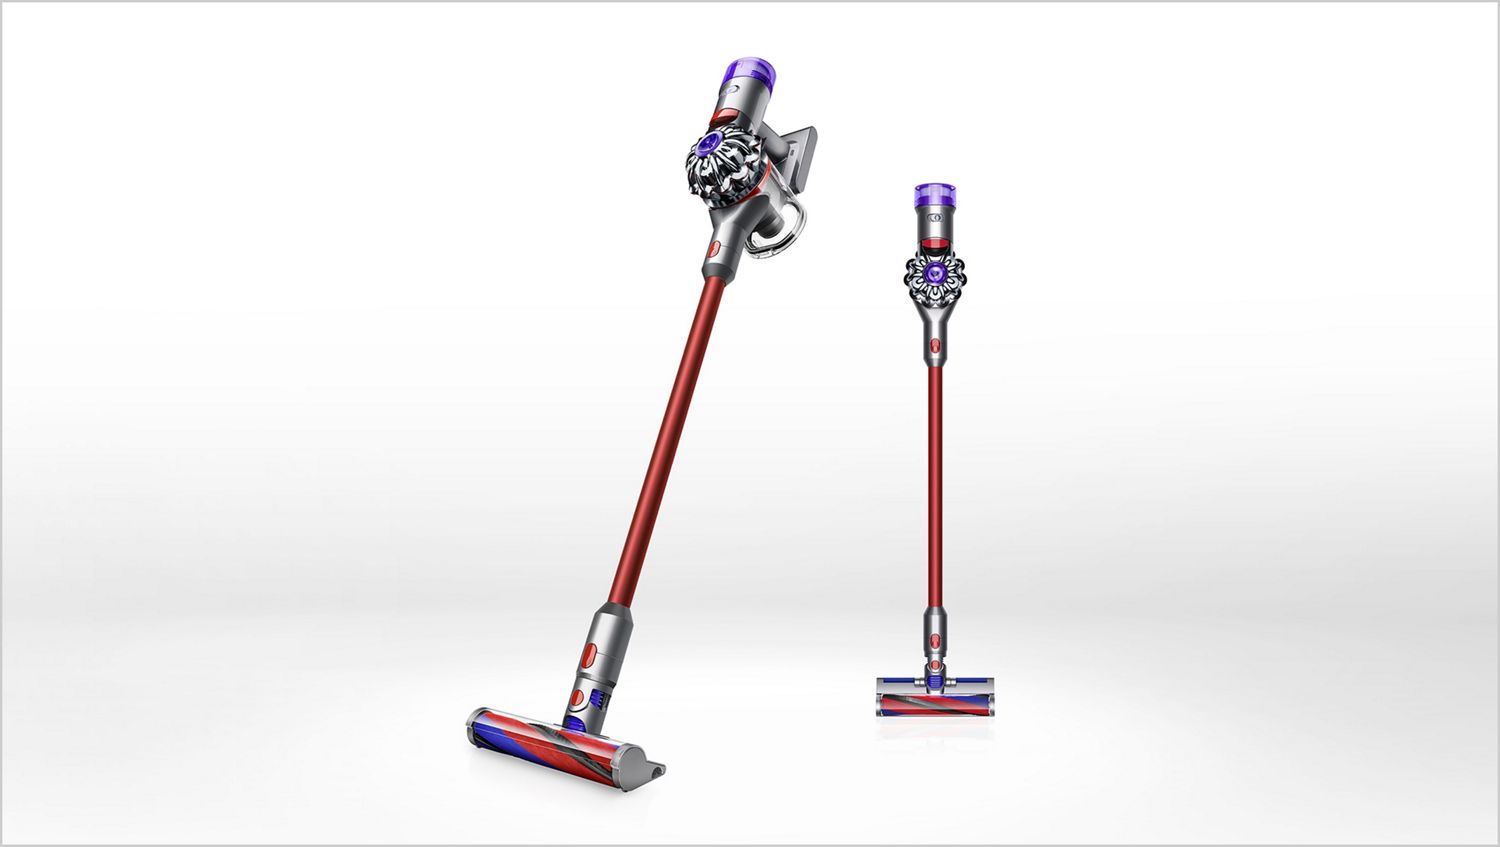 Lightweight, quick cleans - Vacuum Cleaners - Shop all products